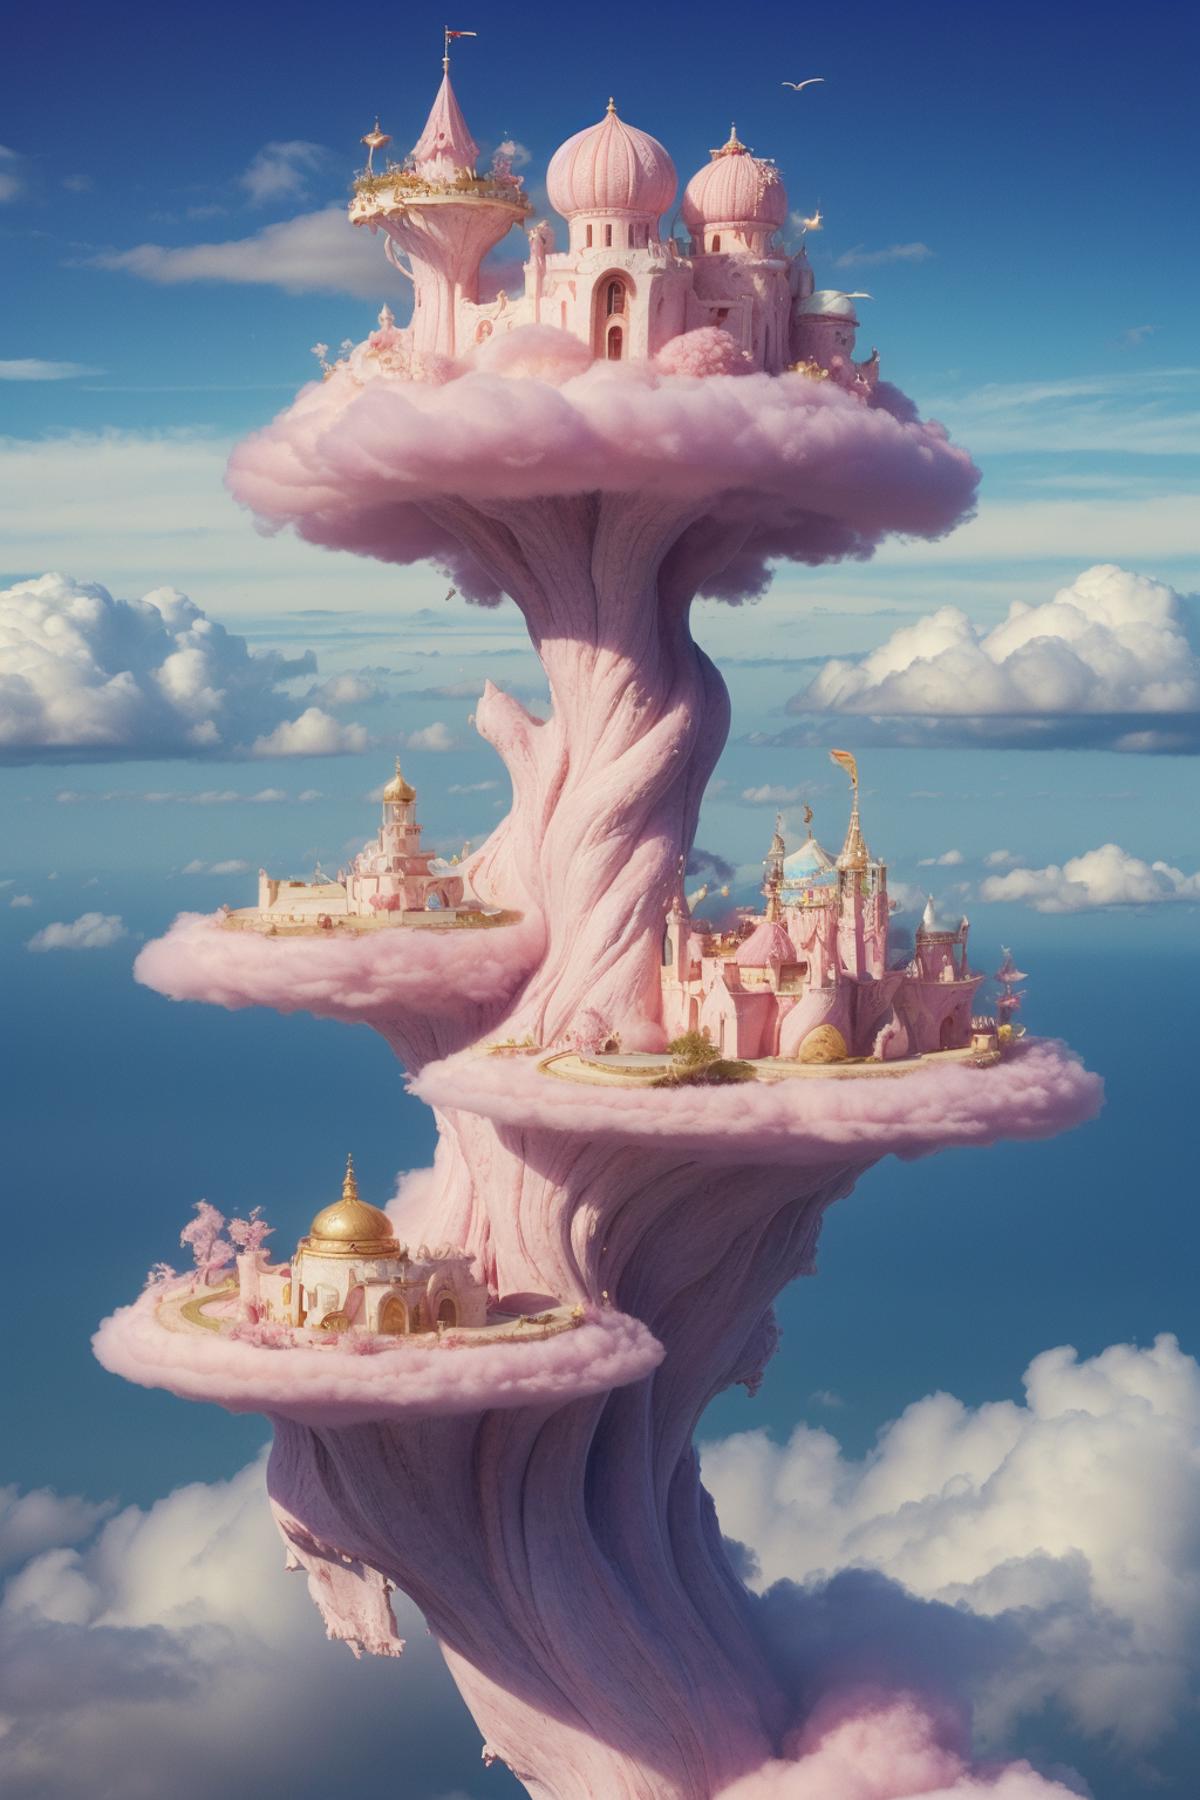 Pink Castle with Turrets on Top of a Tree in a Pink Sky